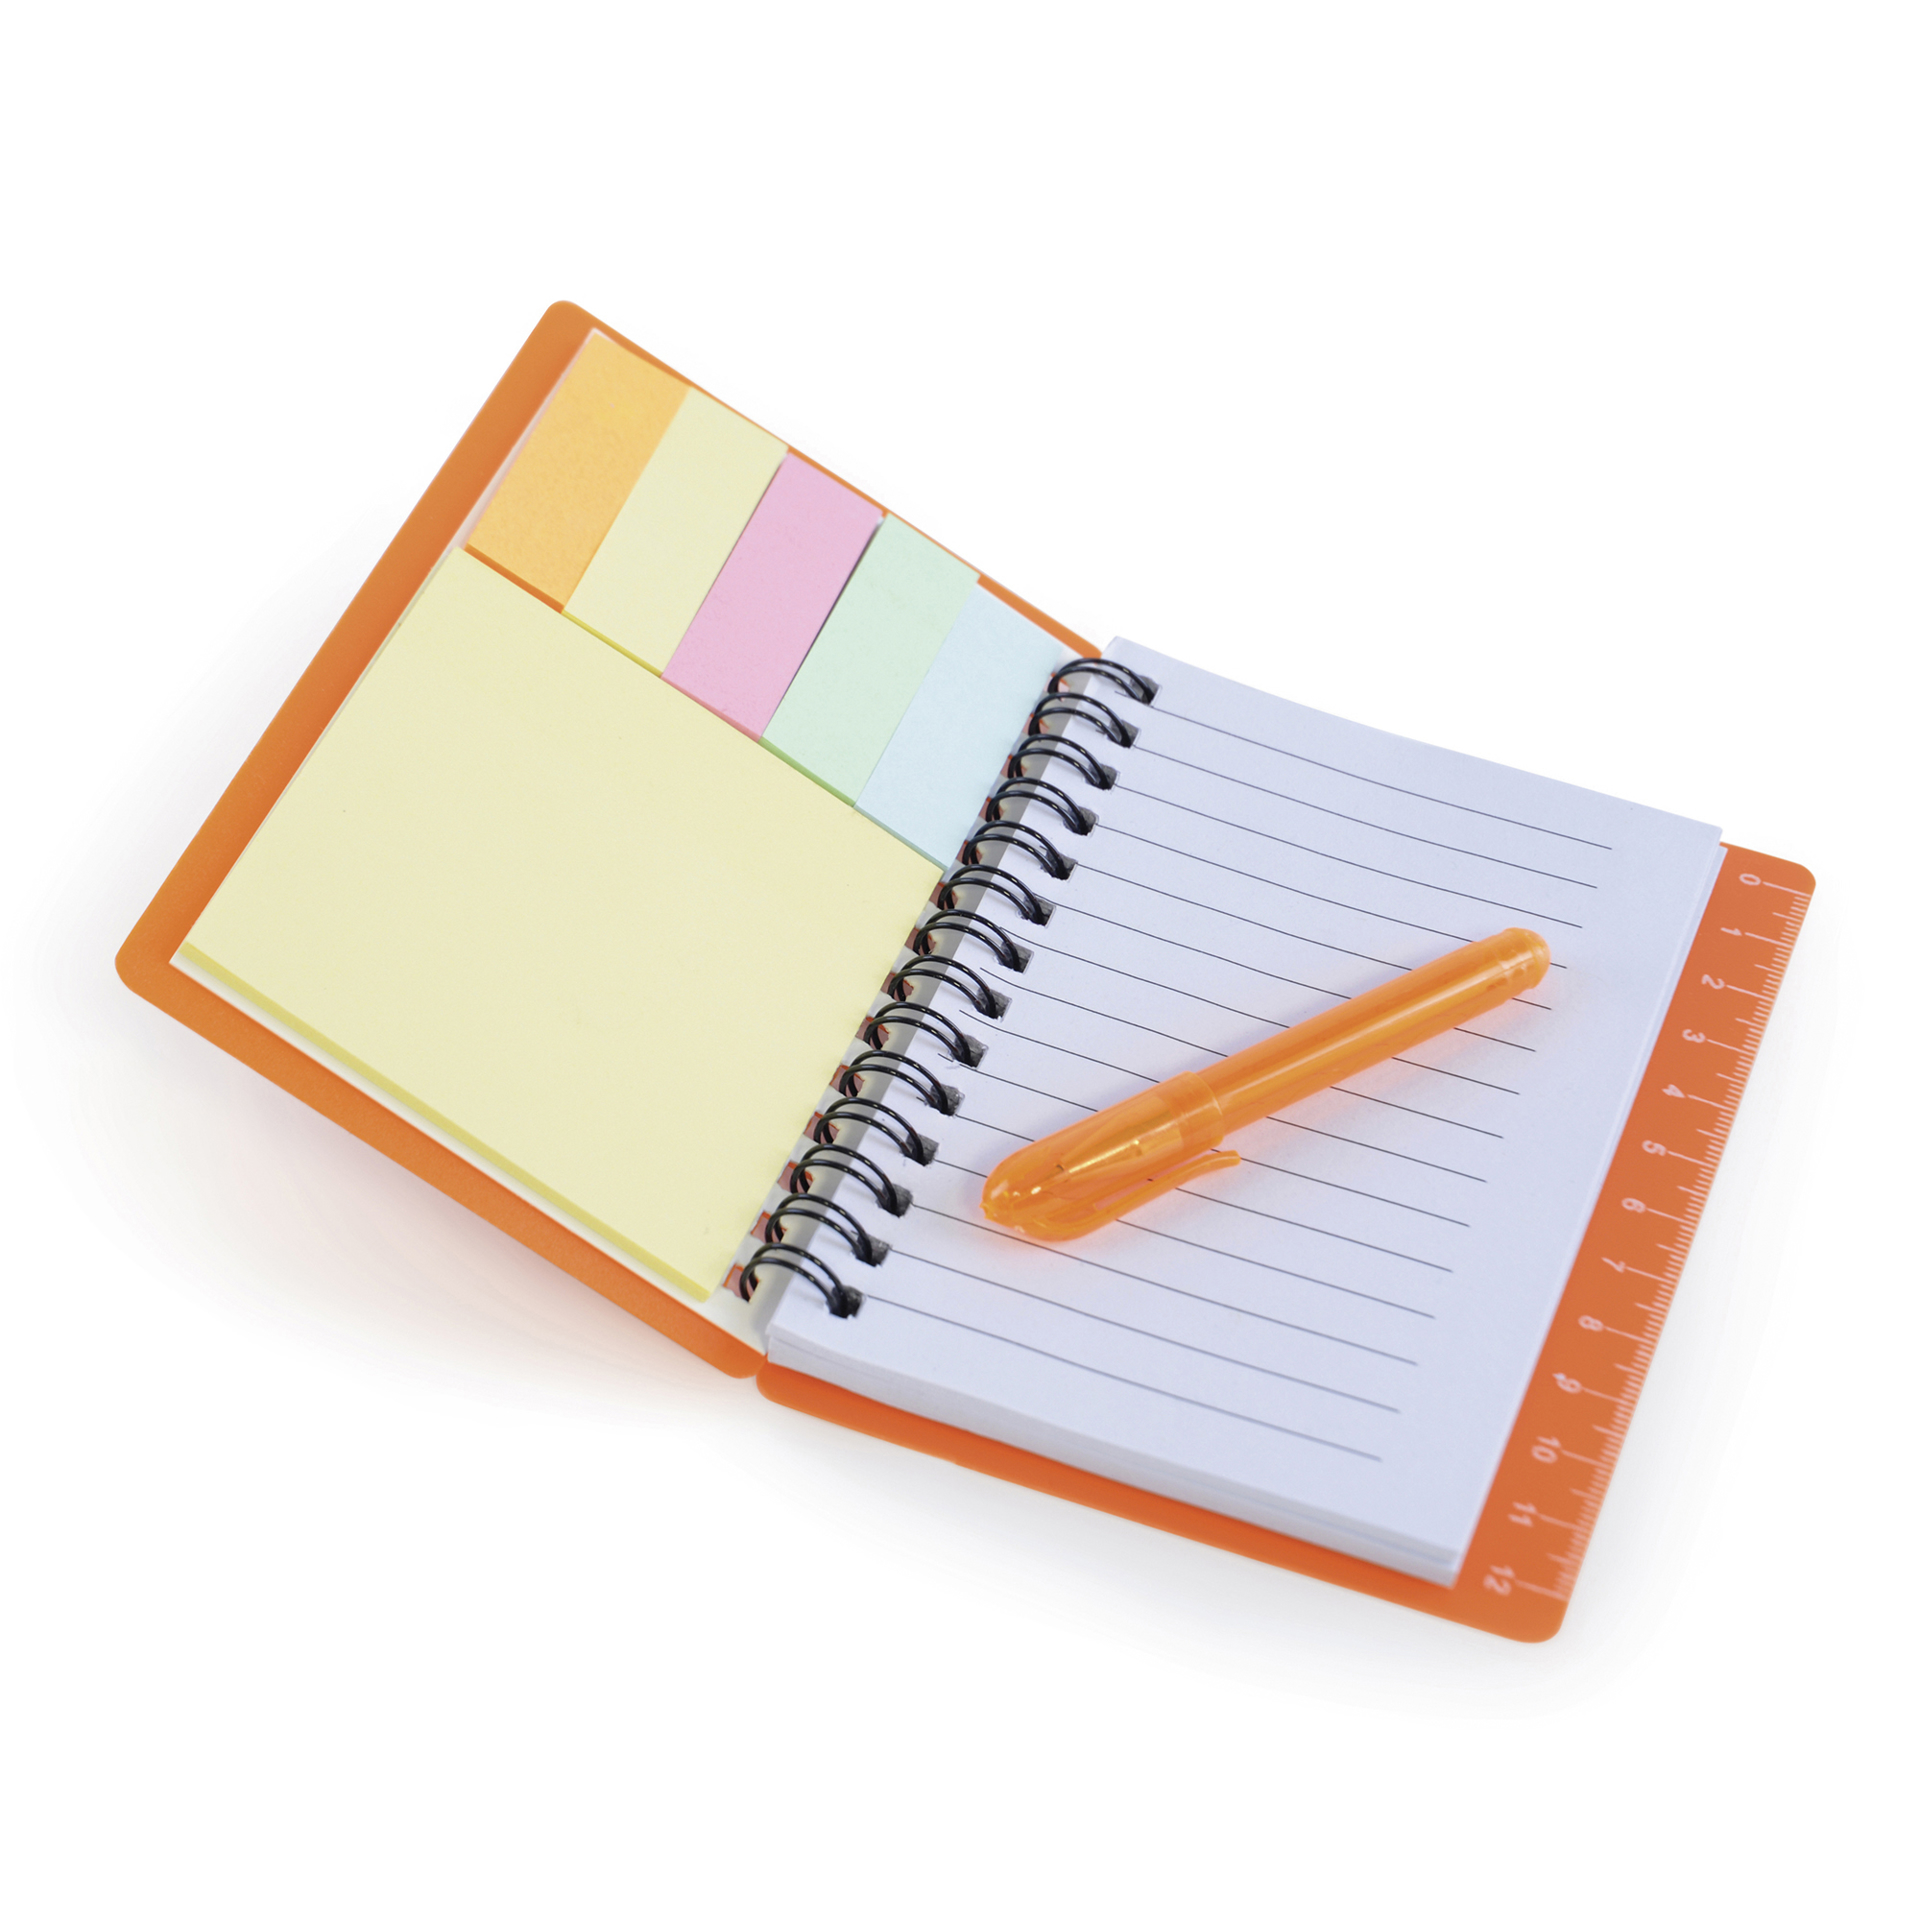 Spiral bound flexible orange plastic covered notebook with matching ball pen with flag set, sticky notes and back cover ruler